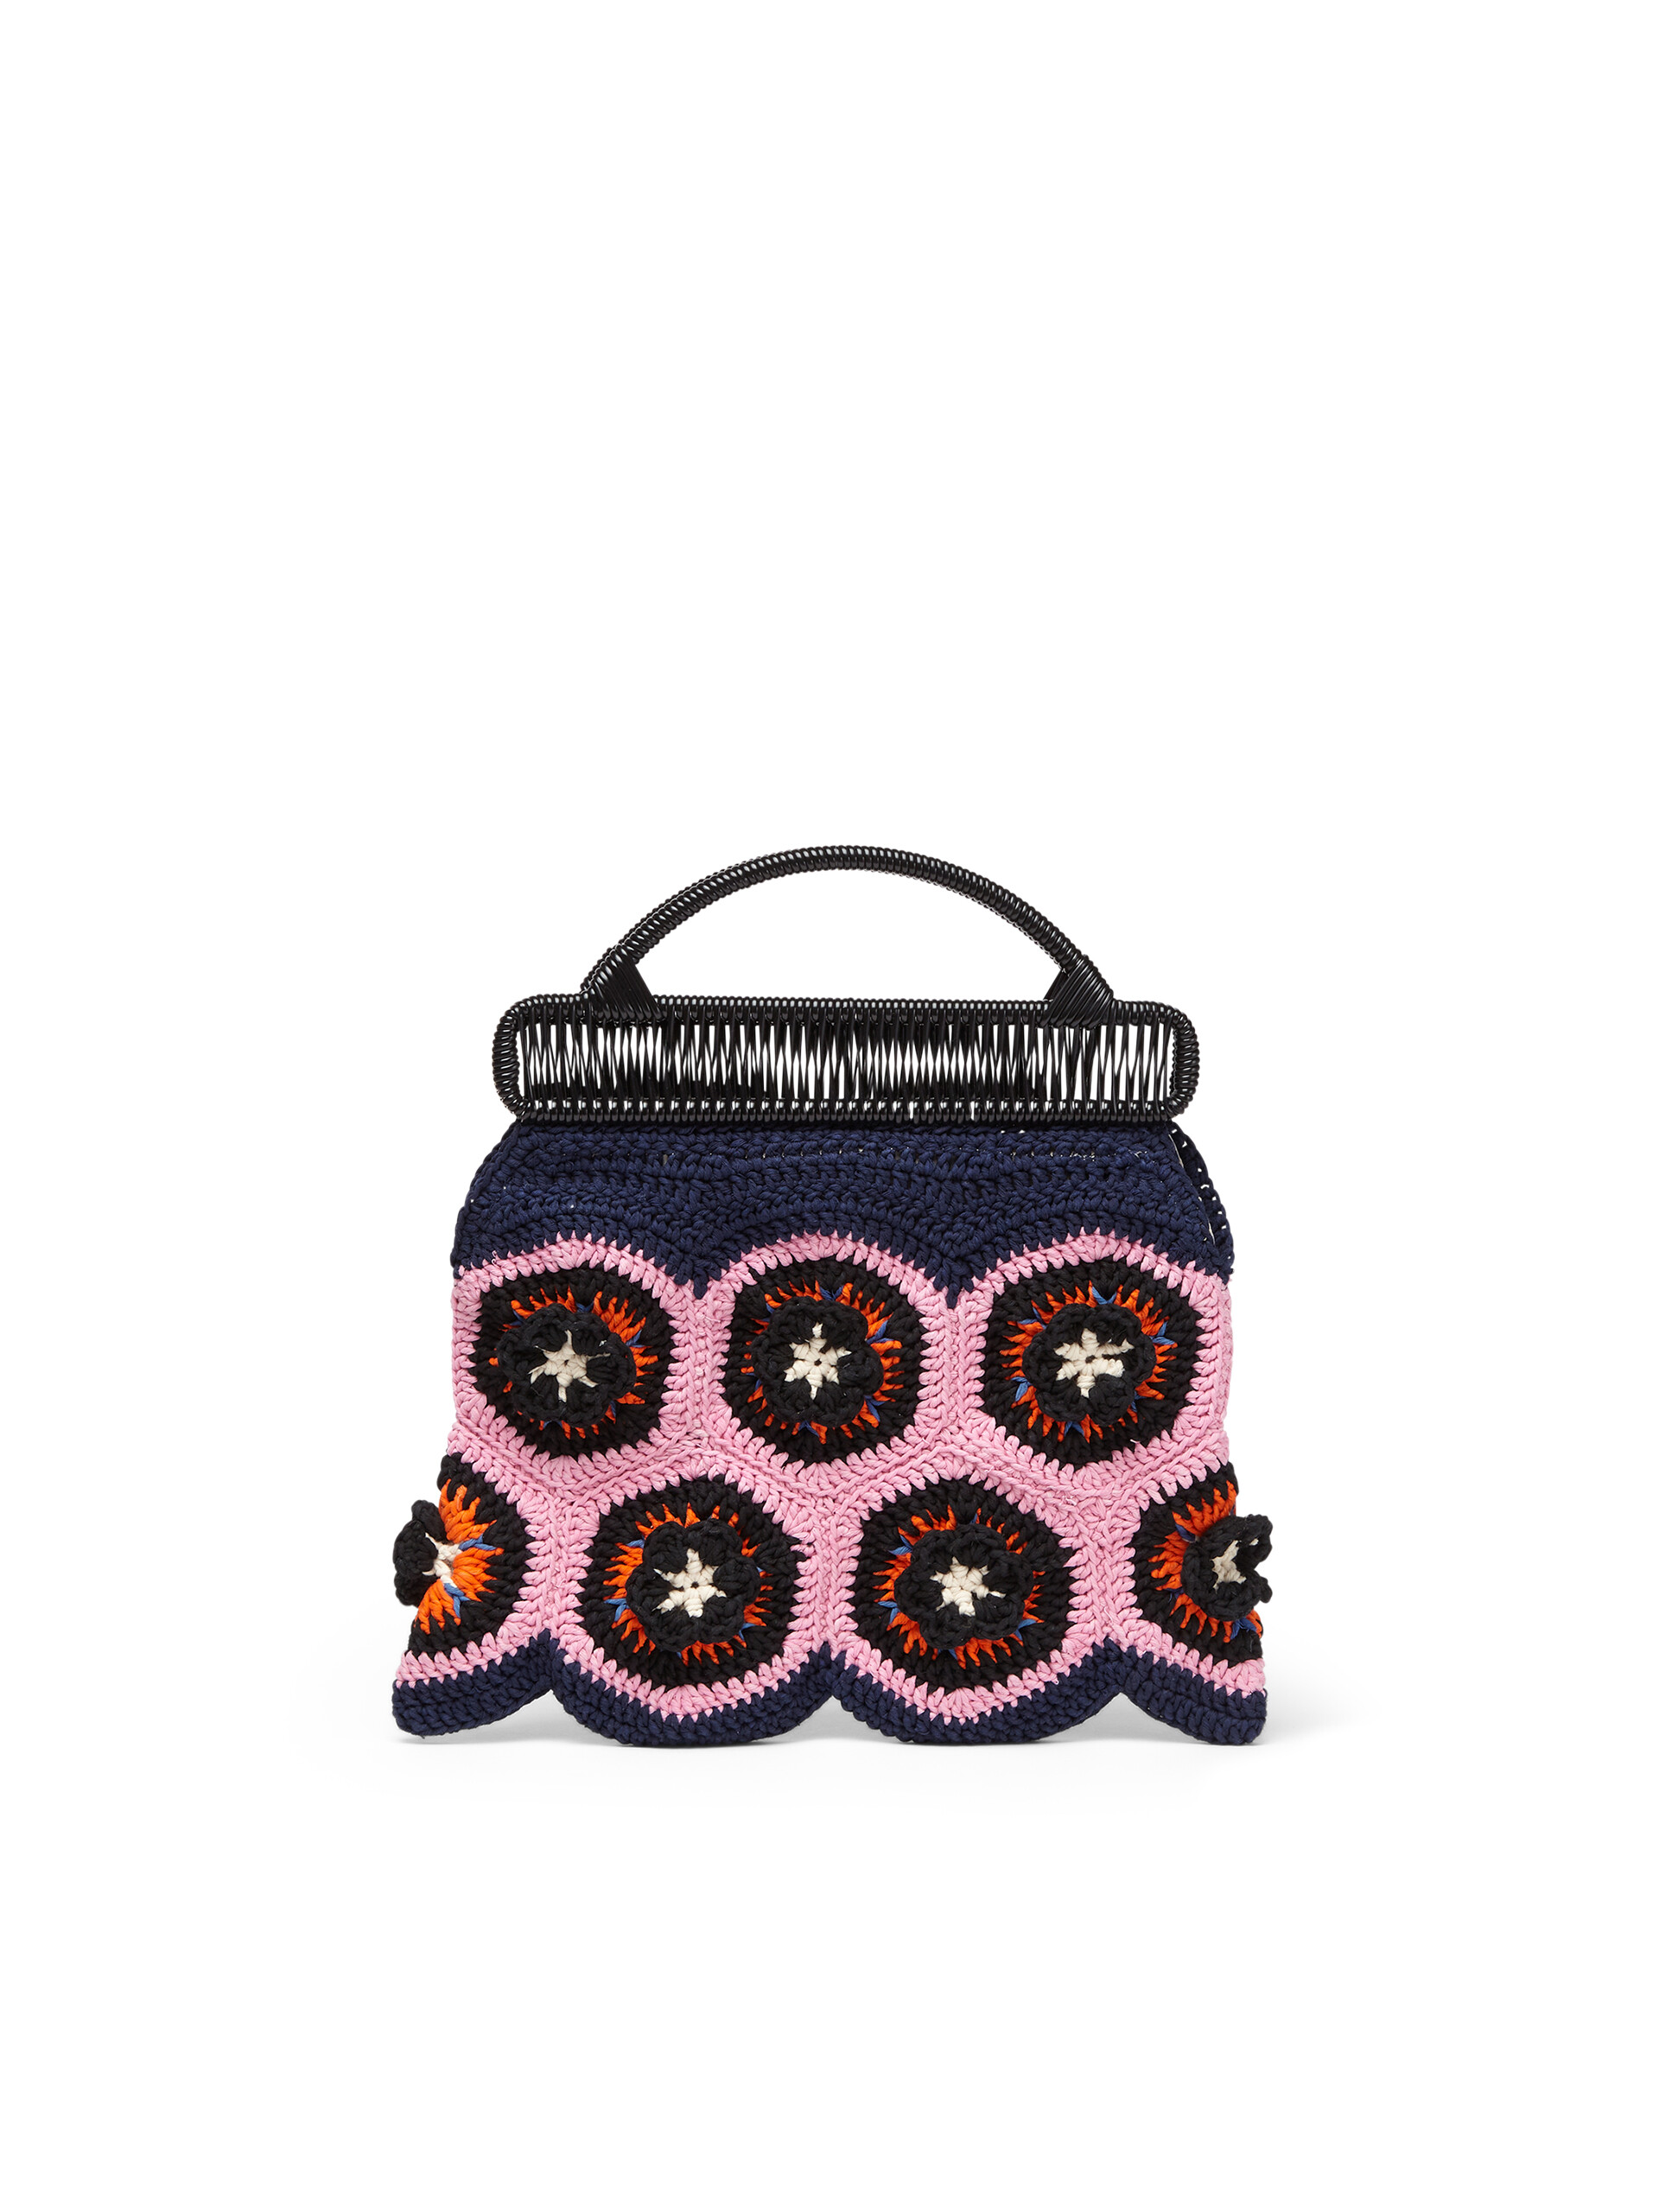 MARNI MARKET bag in pink and blue crochet cotton - Furniture - Image 3